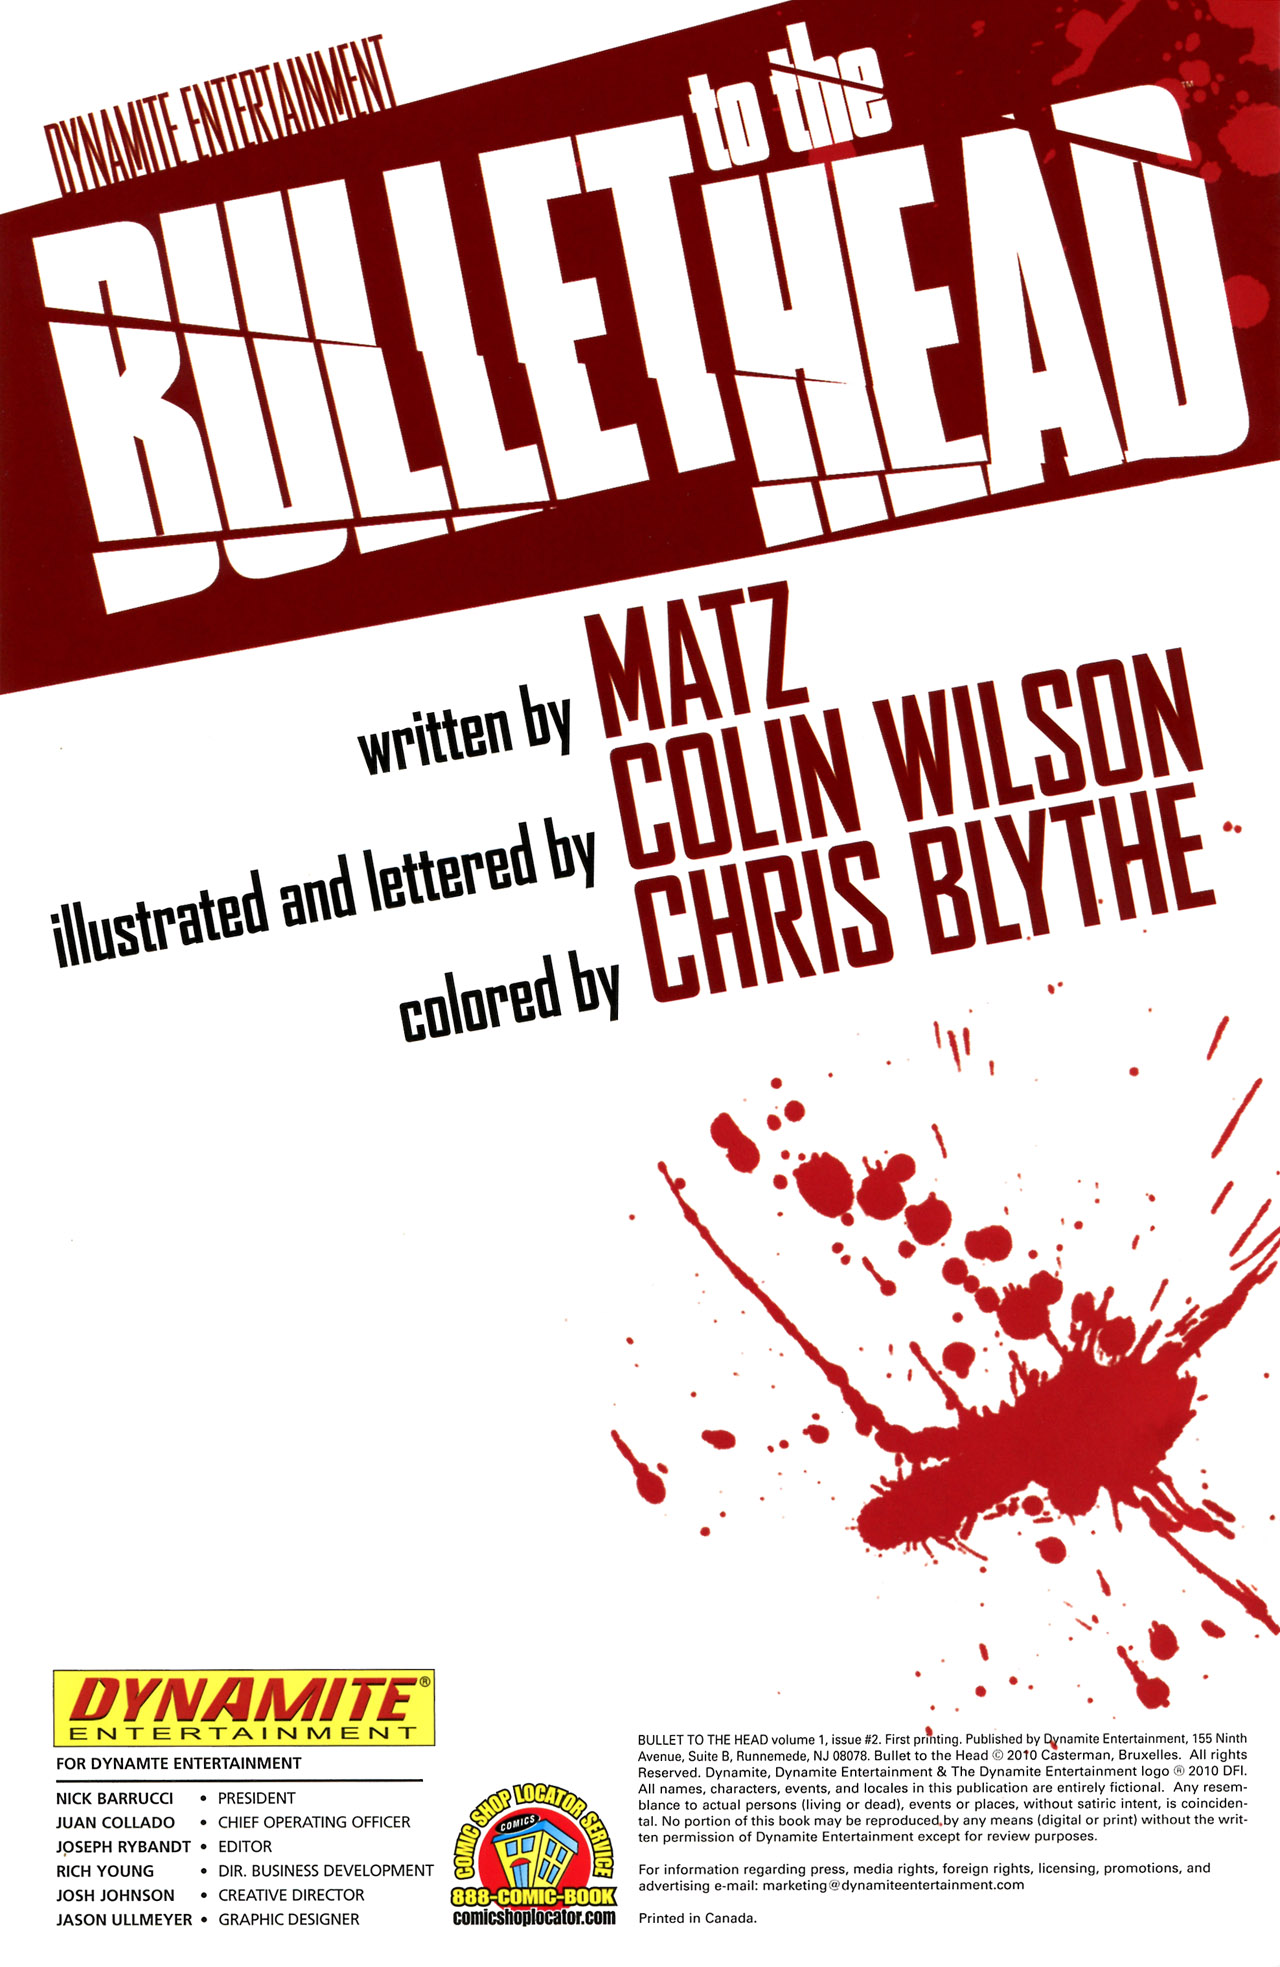 Read online Bullet to the Head comic -  Issue #2 - 2